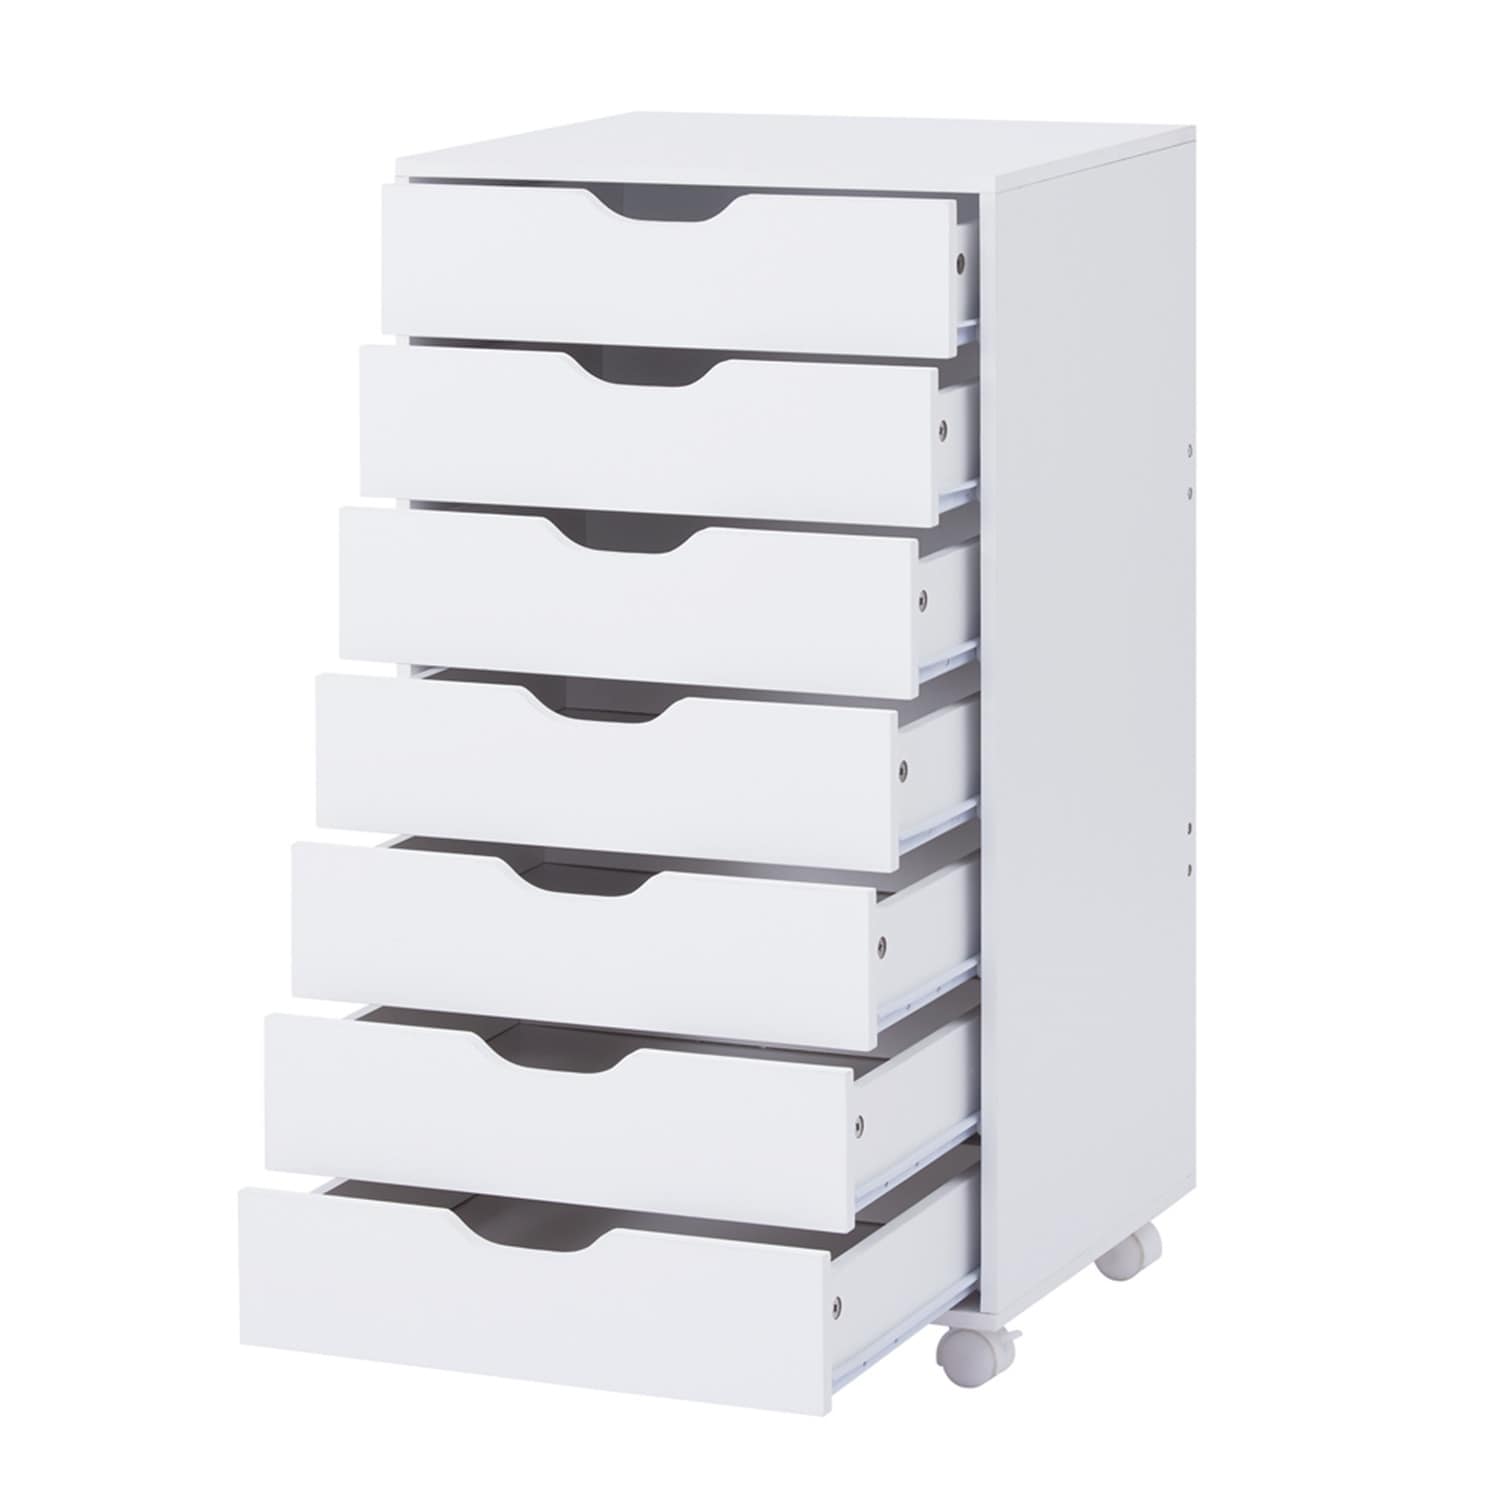 Office File Cabinets Wooden File Cabinets for Home Office Lateral File Cabinet File Cabinet Mobile Storage Drawer Cabinet - Grey Grey - image 3 of 5